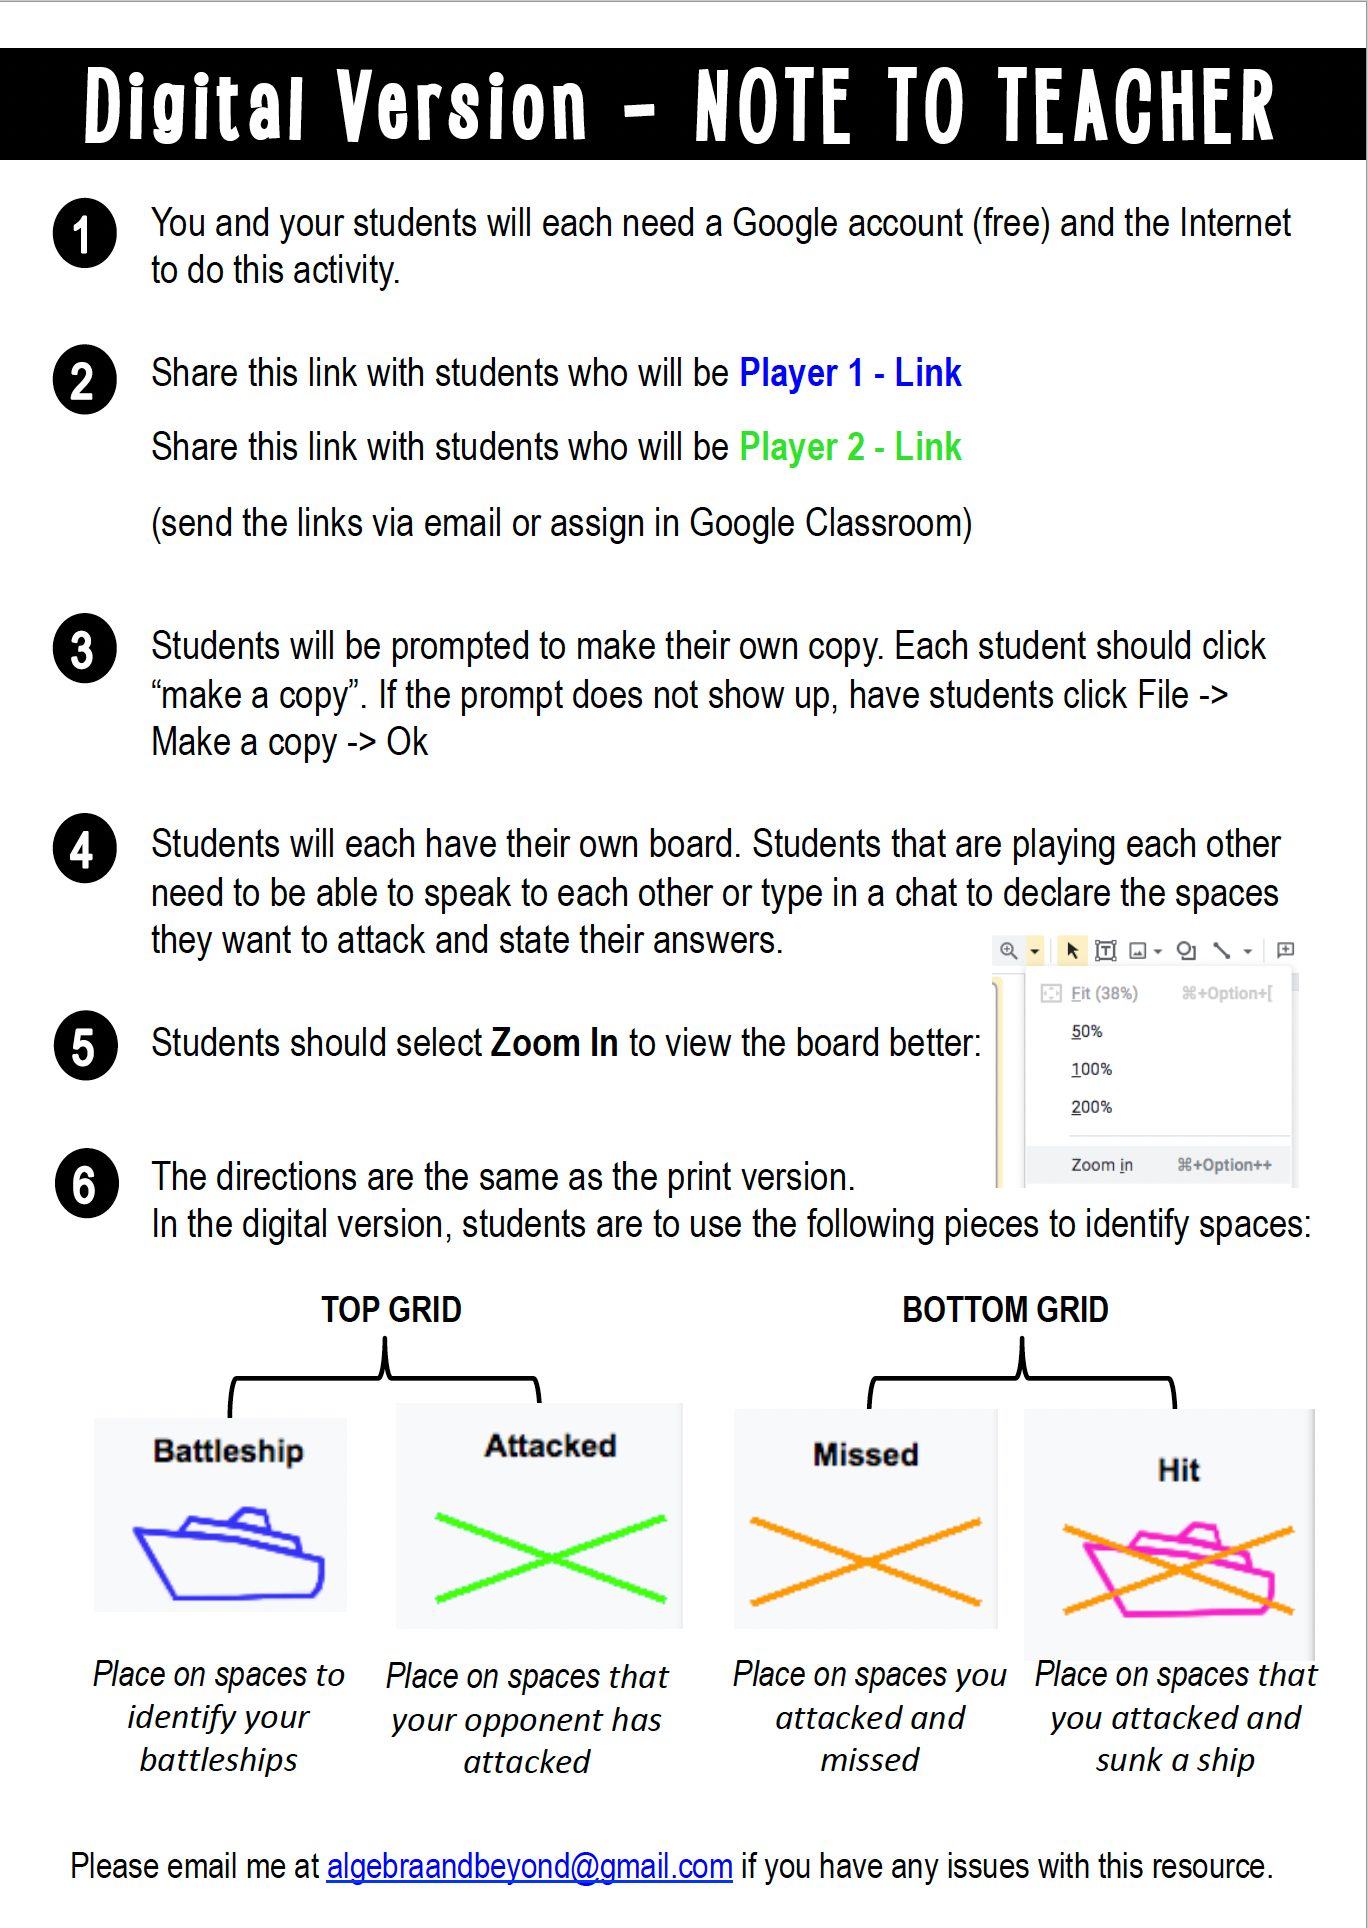 Order of Operations (no negatives) Activity | Battle My Math Ship Game | Print and Digital